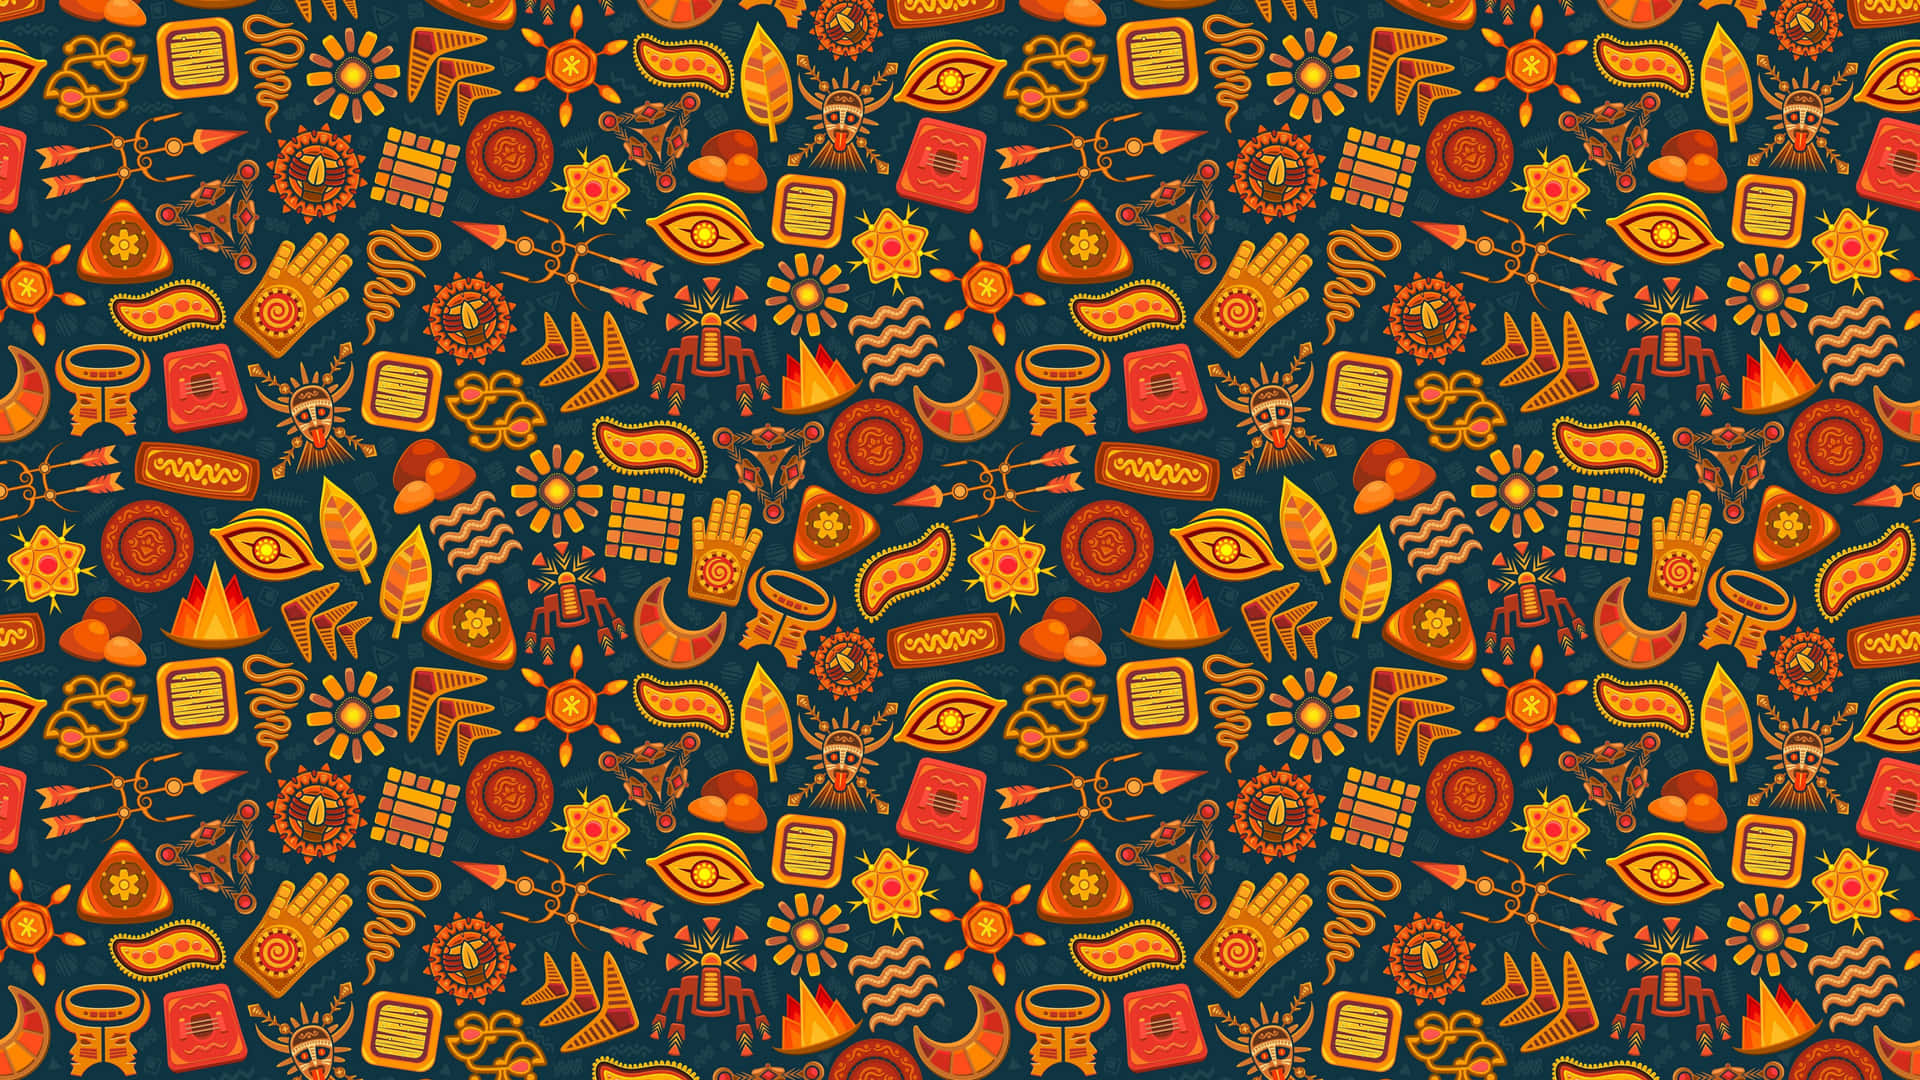 A colorful and lively pattern Wallpaper